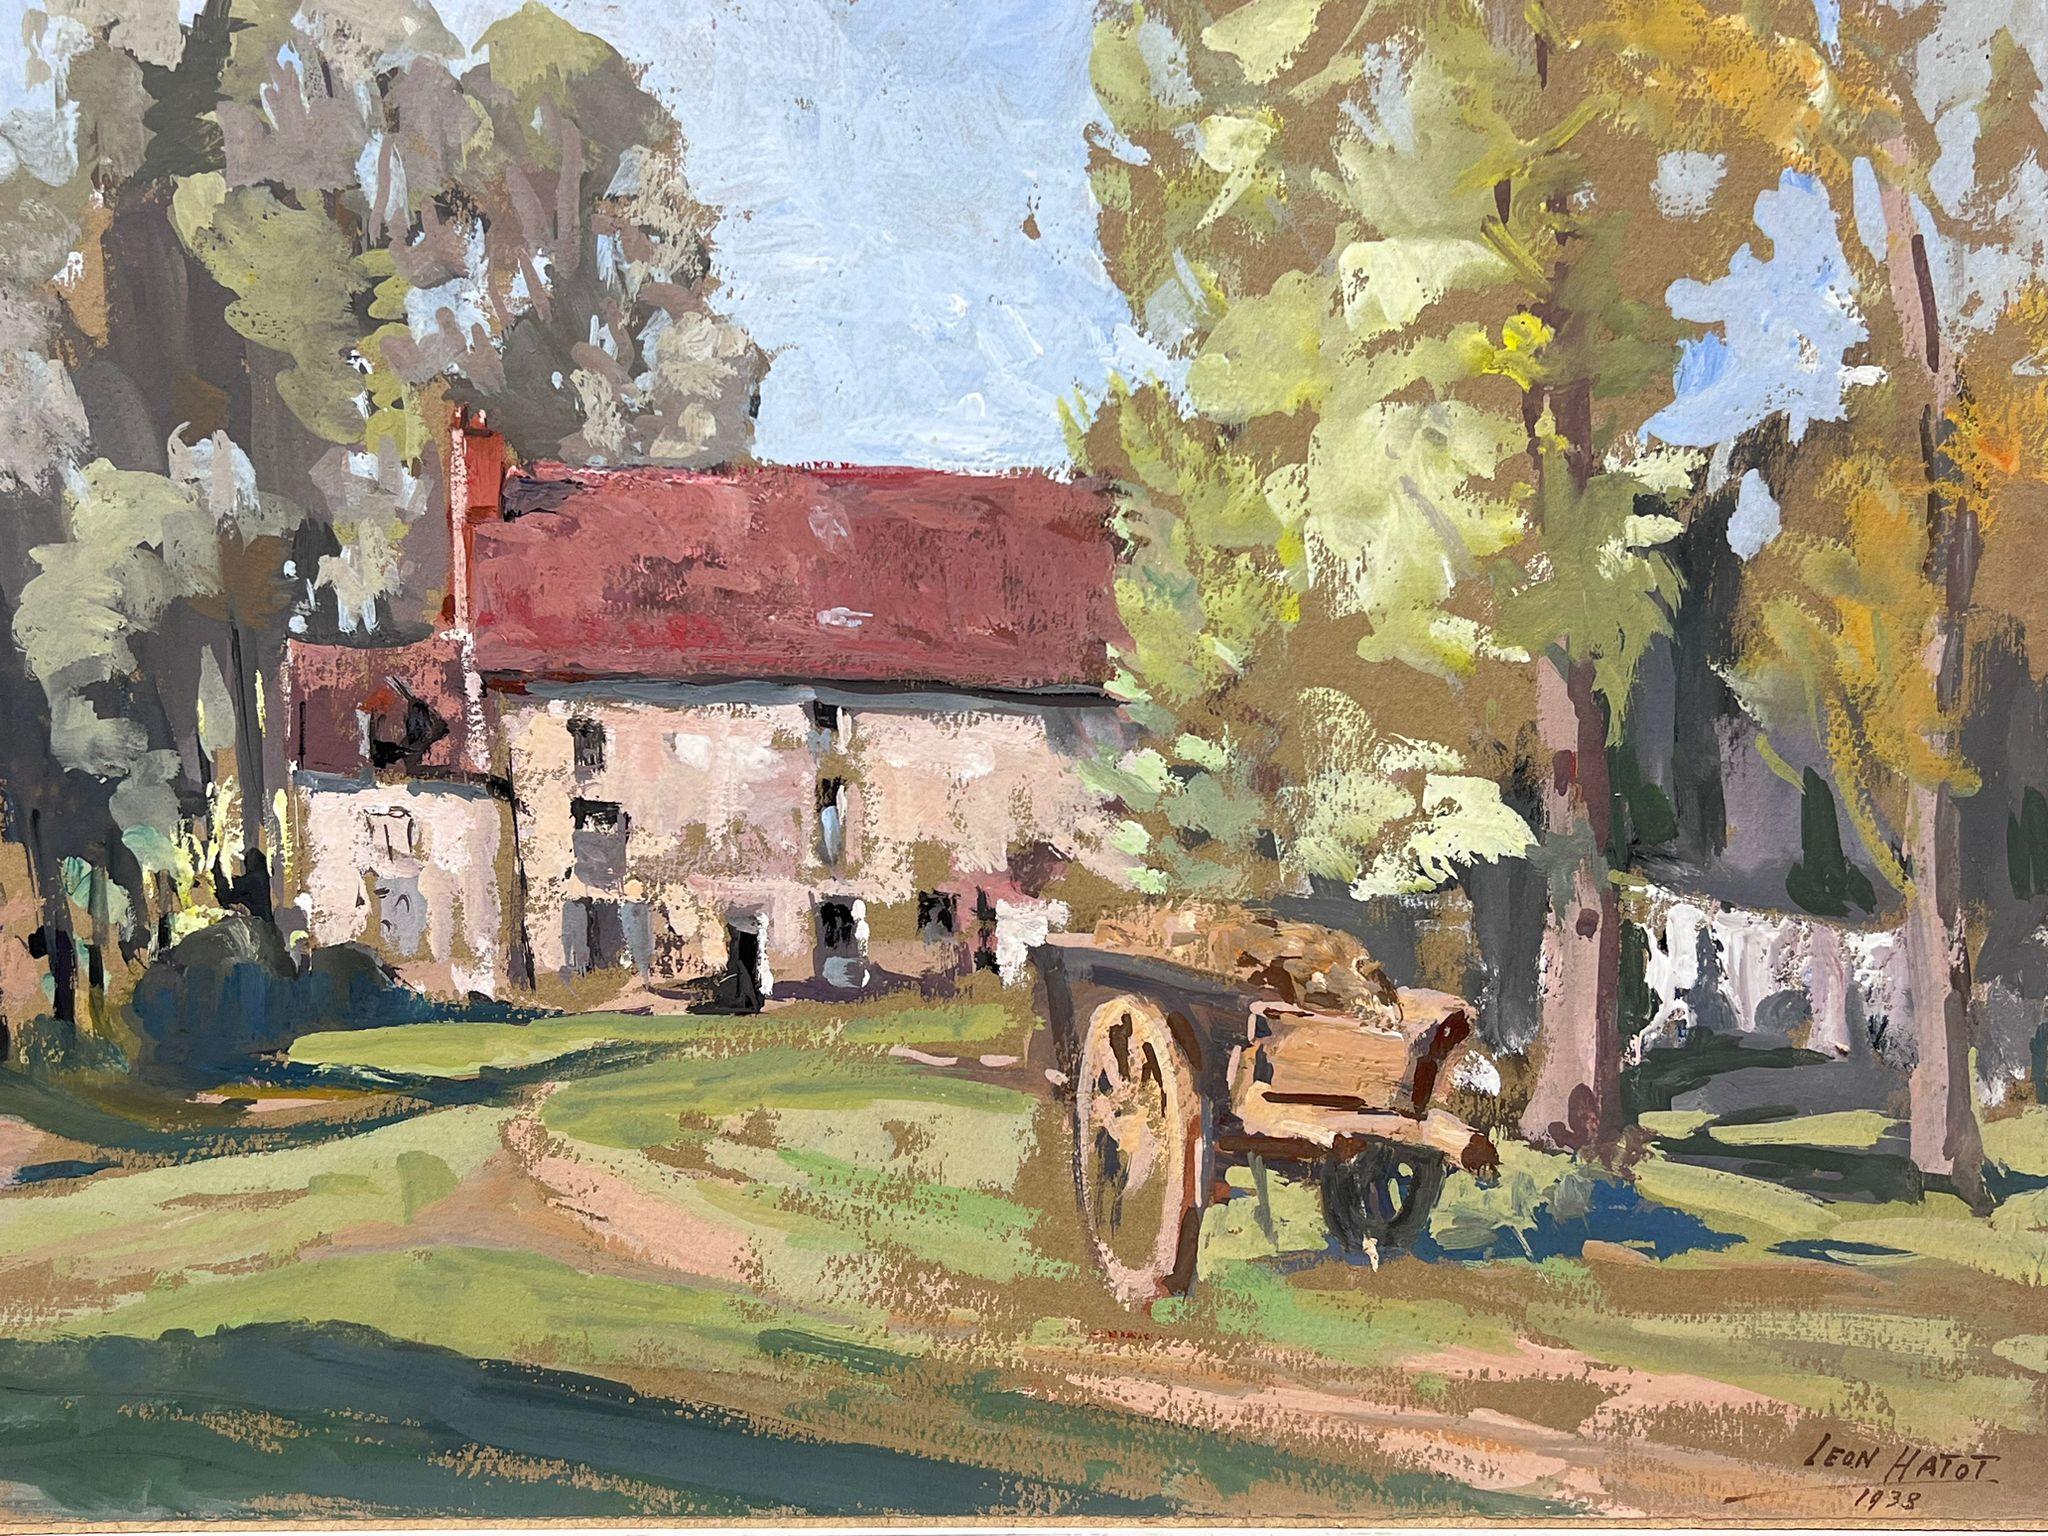 Artist/ School: Leon Hatot (French 1883-1953)

Title: Impressionist oil painting 

Medium: signed oil painting on thick paper, stuck on board unframed.
dated 1938

Size: painting: 12 x 19.5 inches

Provenance: all the paintings we have for sale by